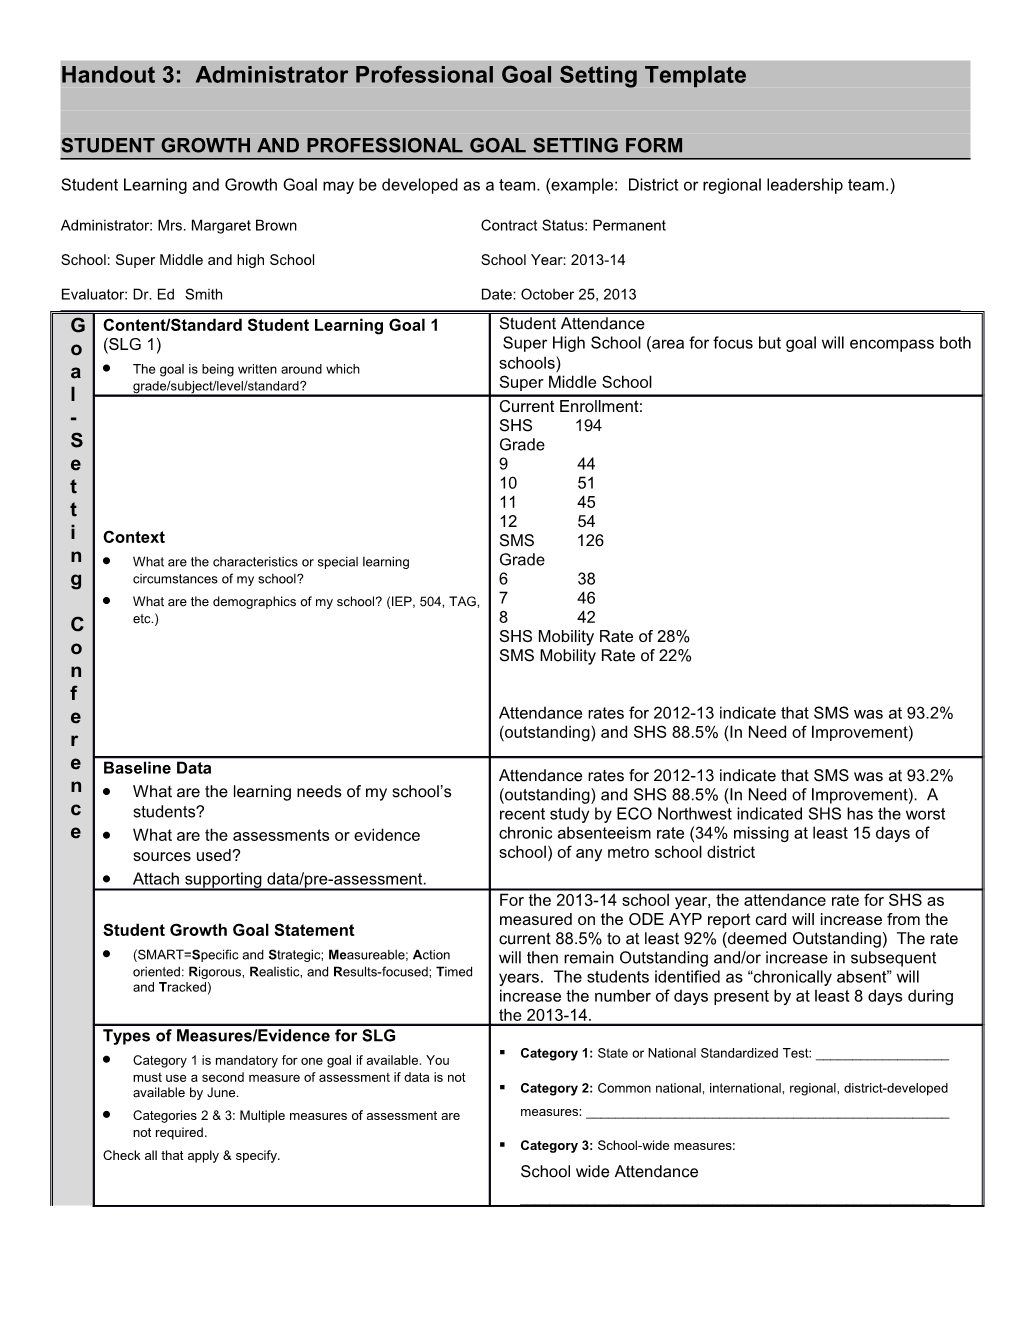 Student Growth and Professional Goal Setting Form